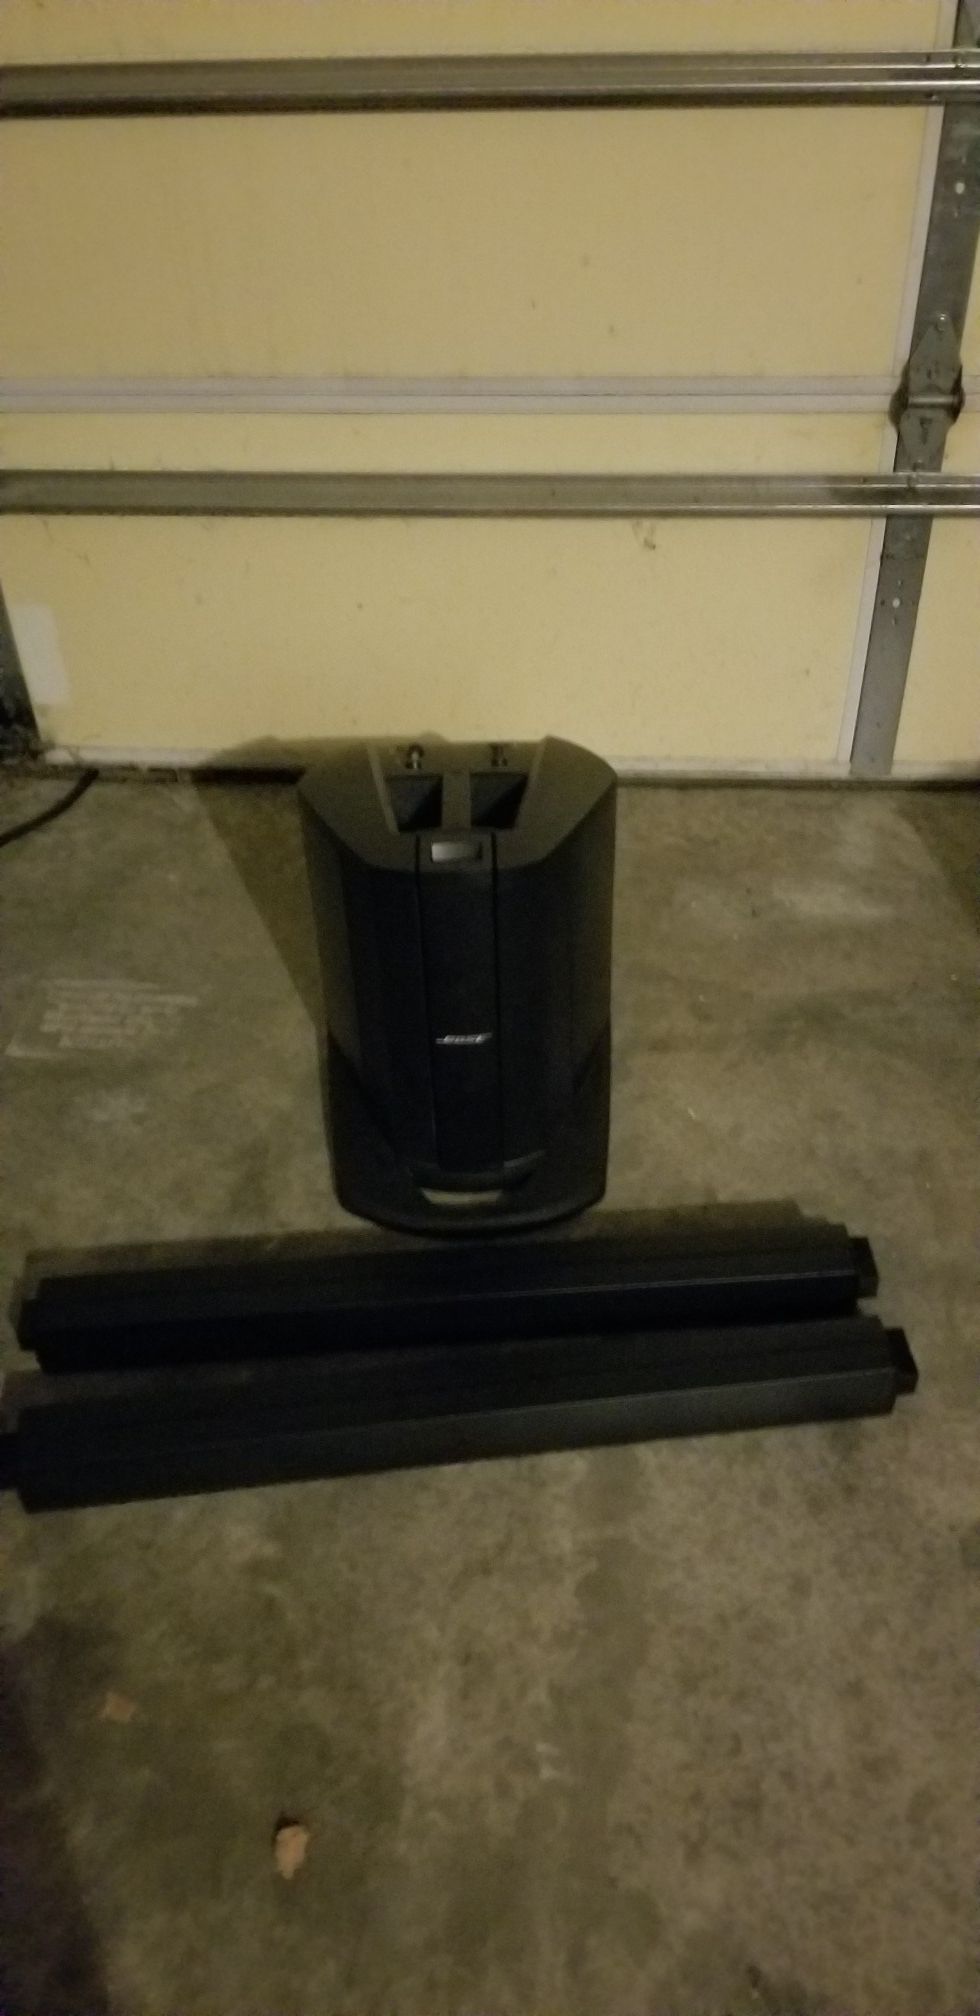 Bose speaker stand very cheap $500 compare price no cables neither Microfone